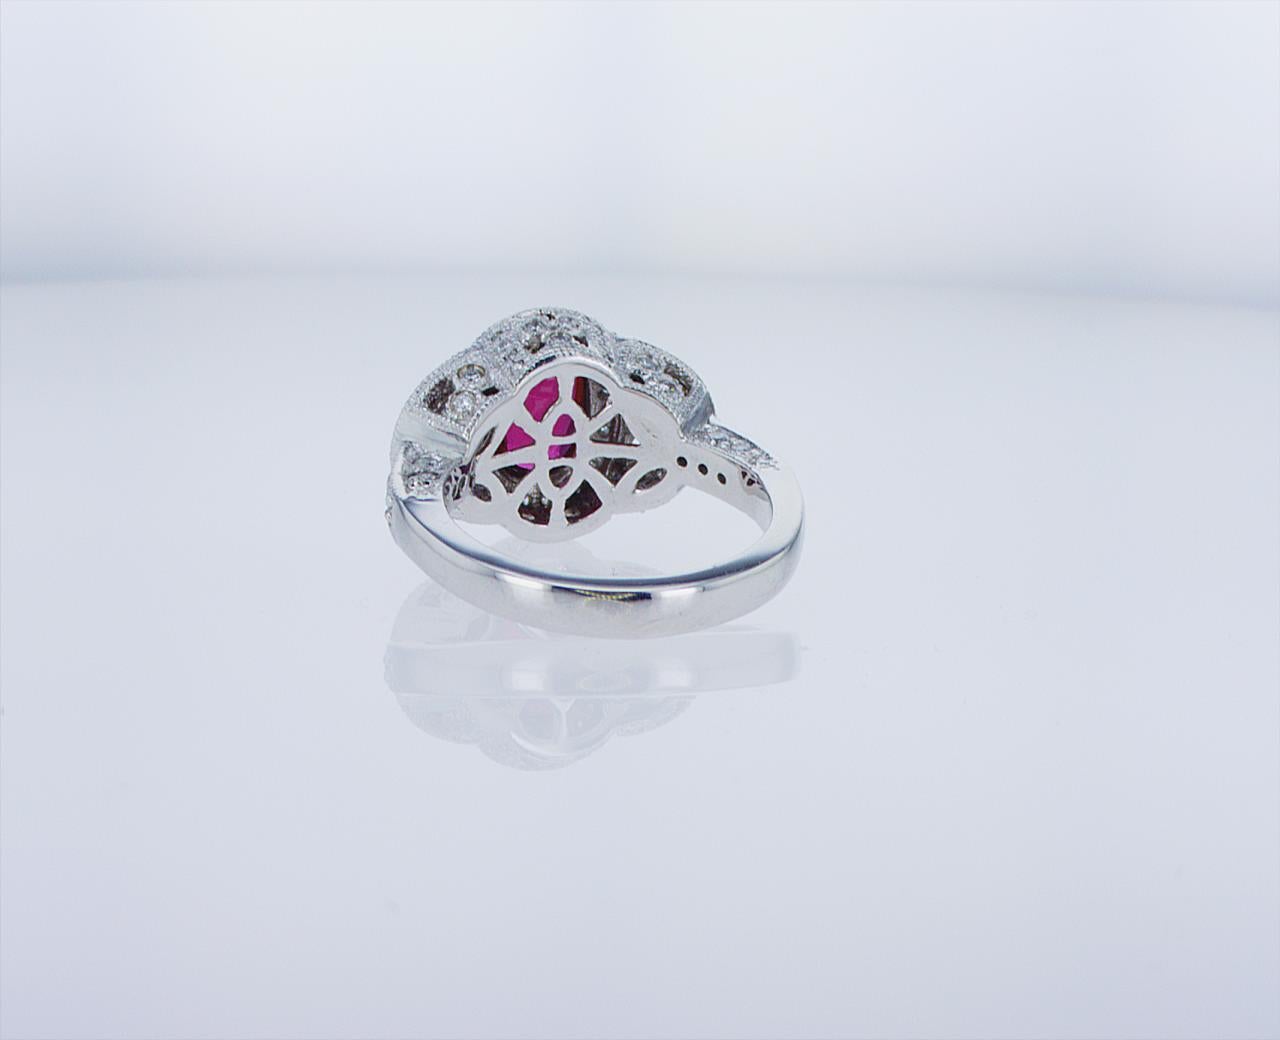 Oval Ruby Cocktail Ring with Half Moon Diamond Accents For Sale 4